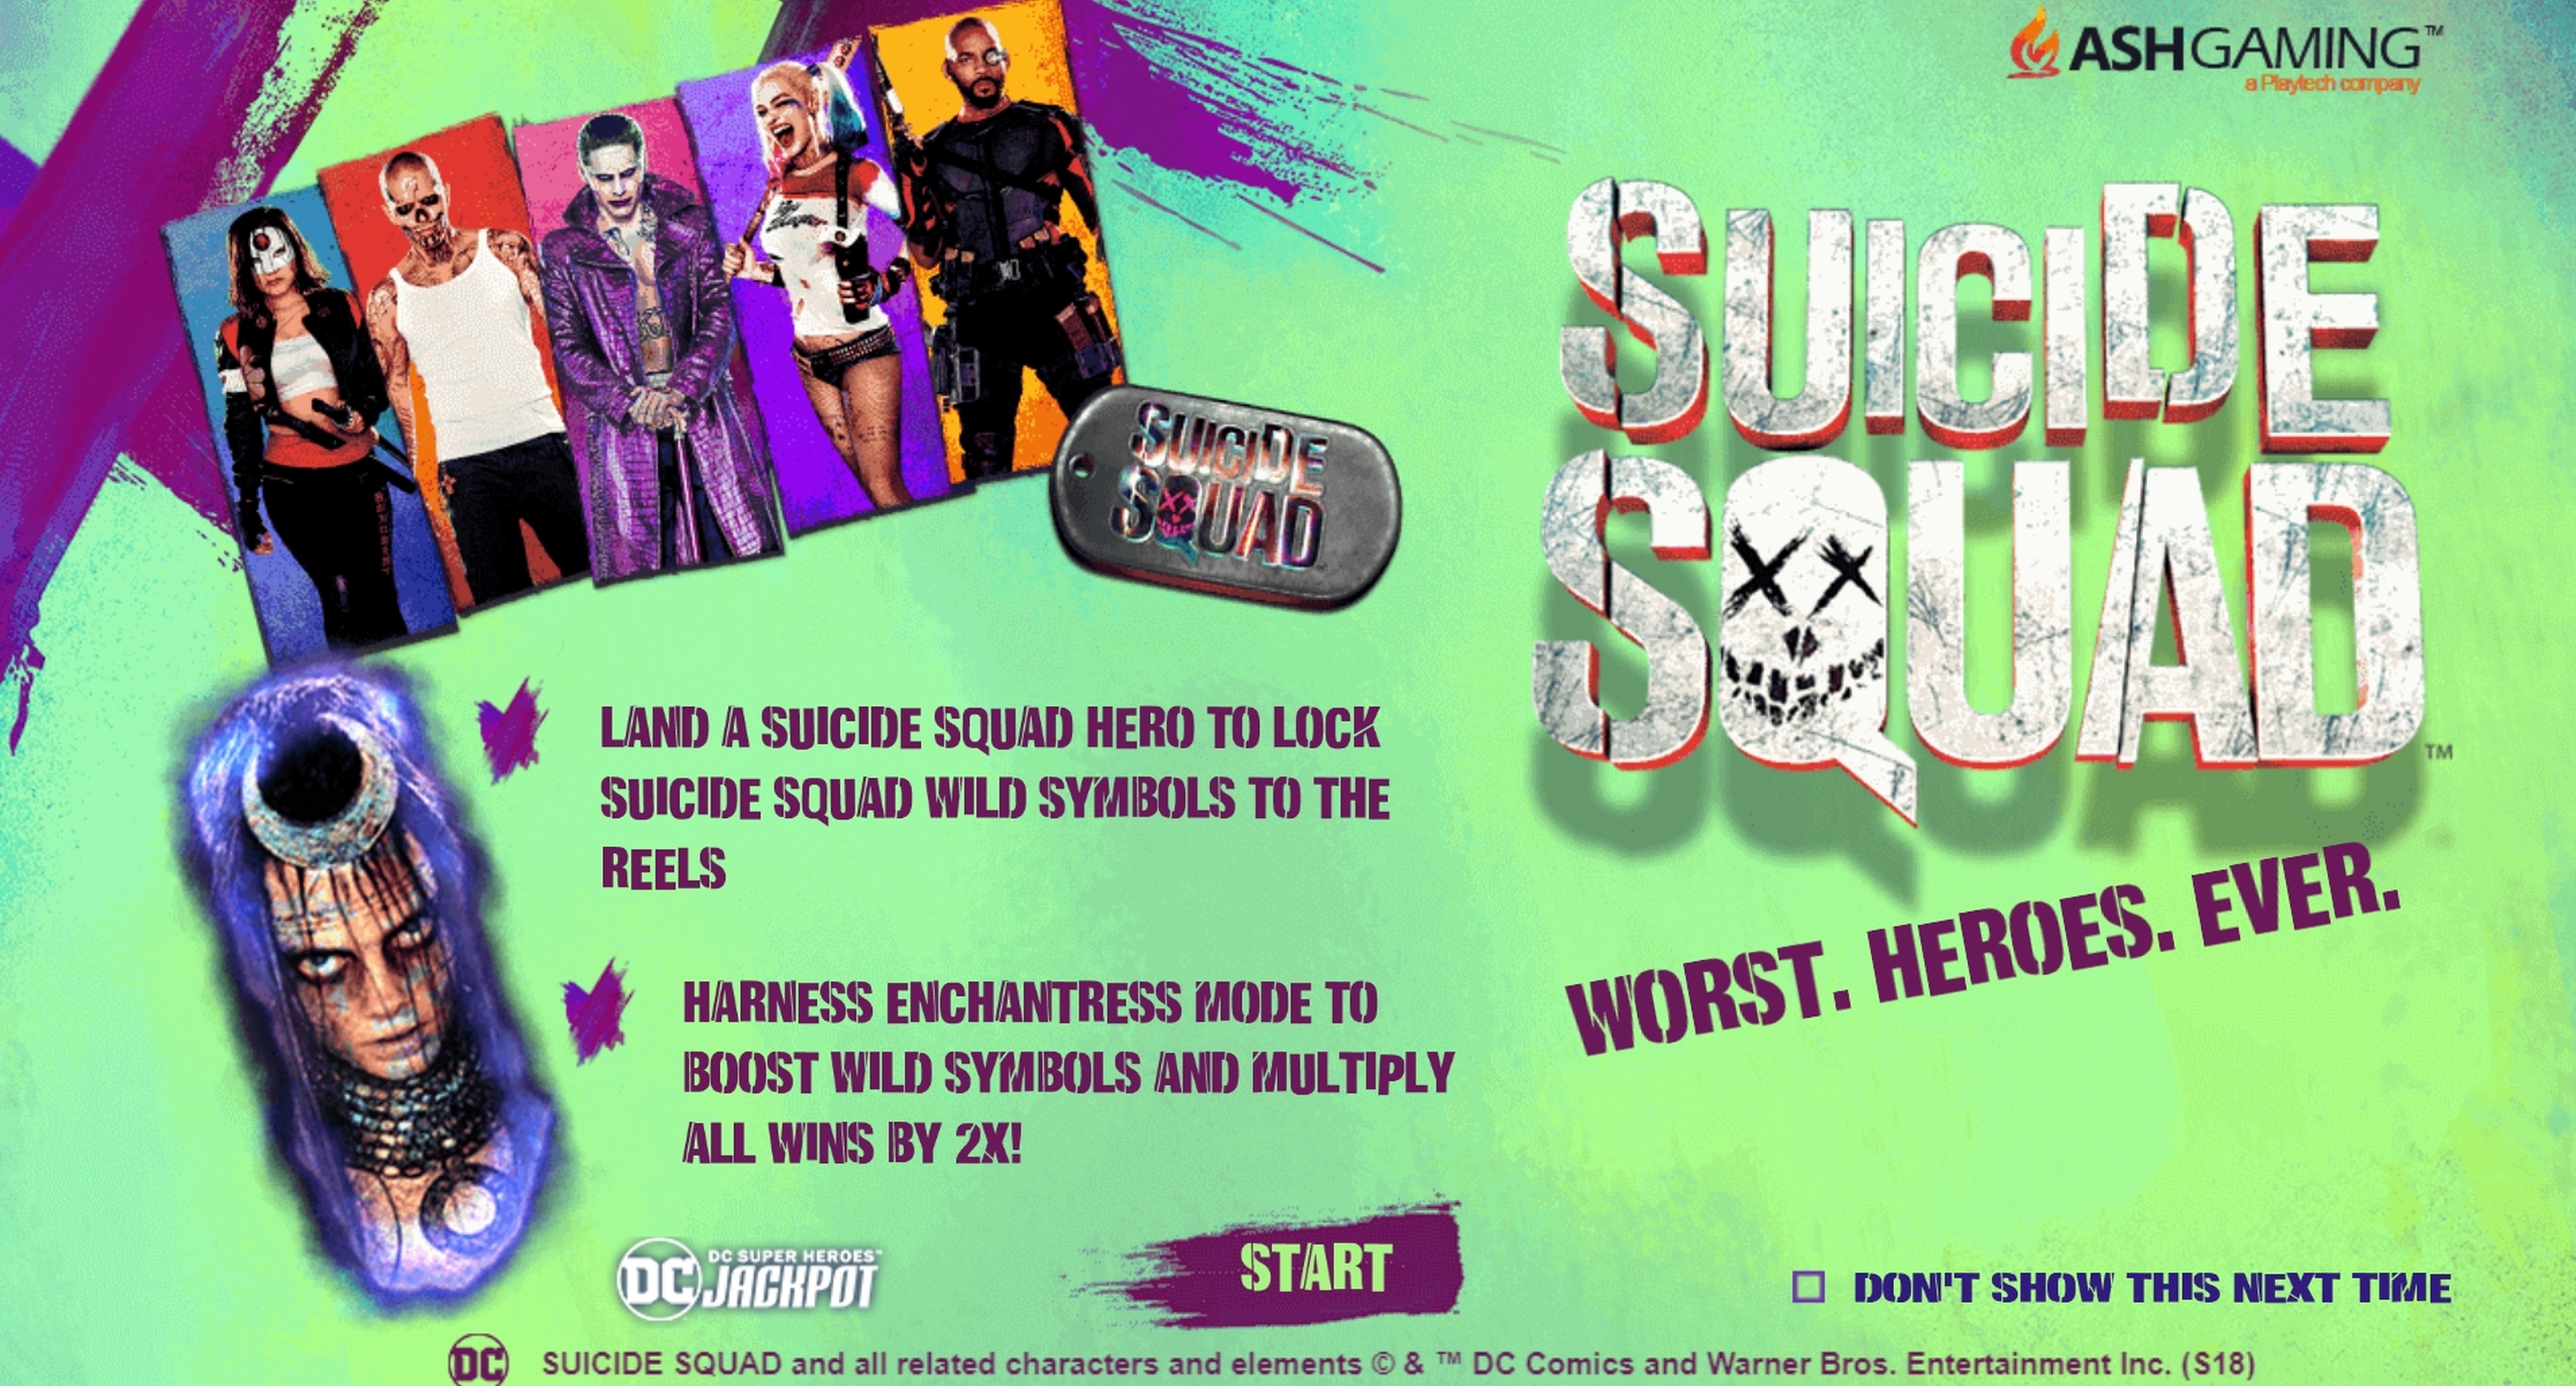 Play Suicide Squad Free Casino Slot Game by Ash Gaming